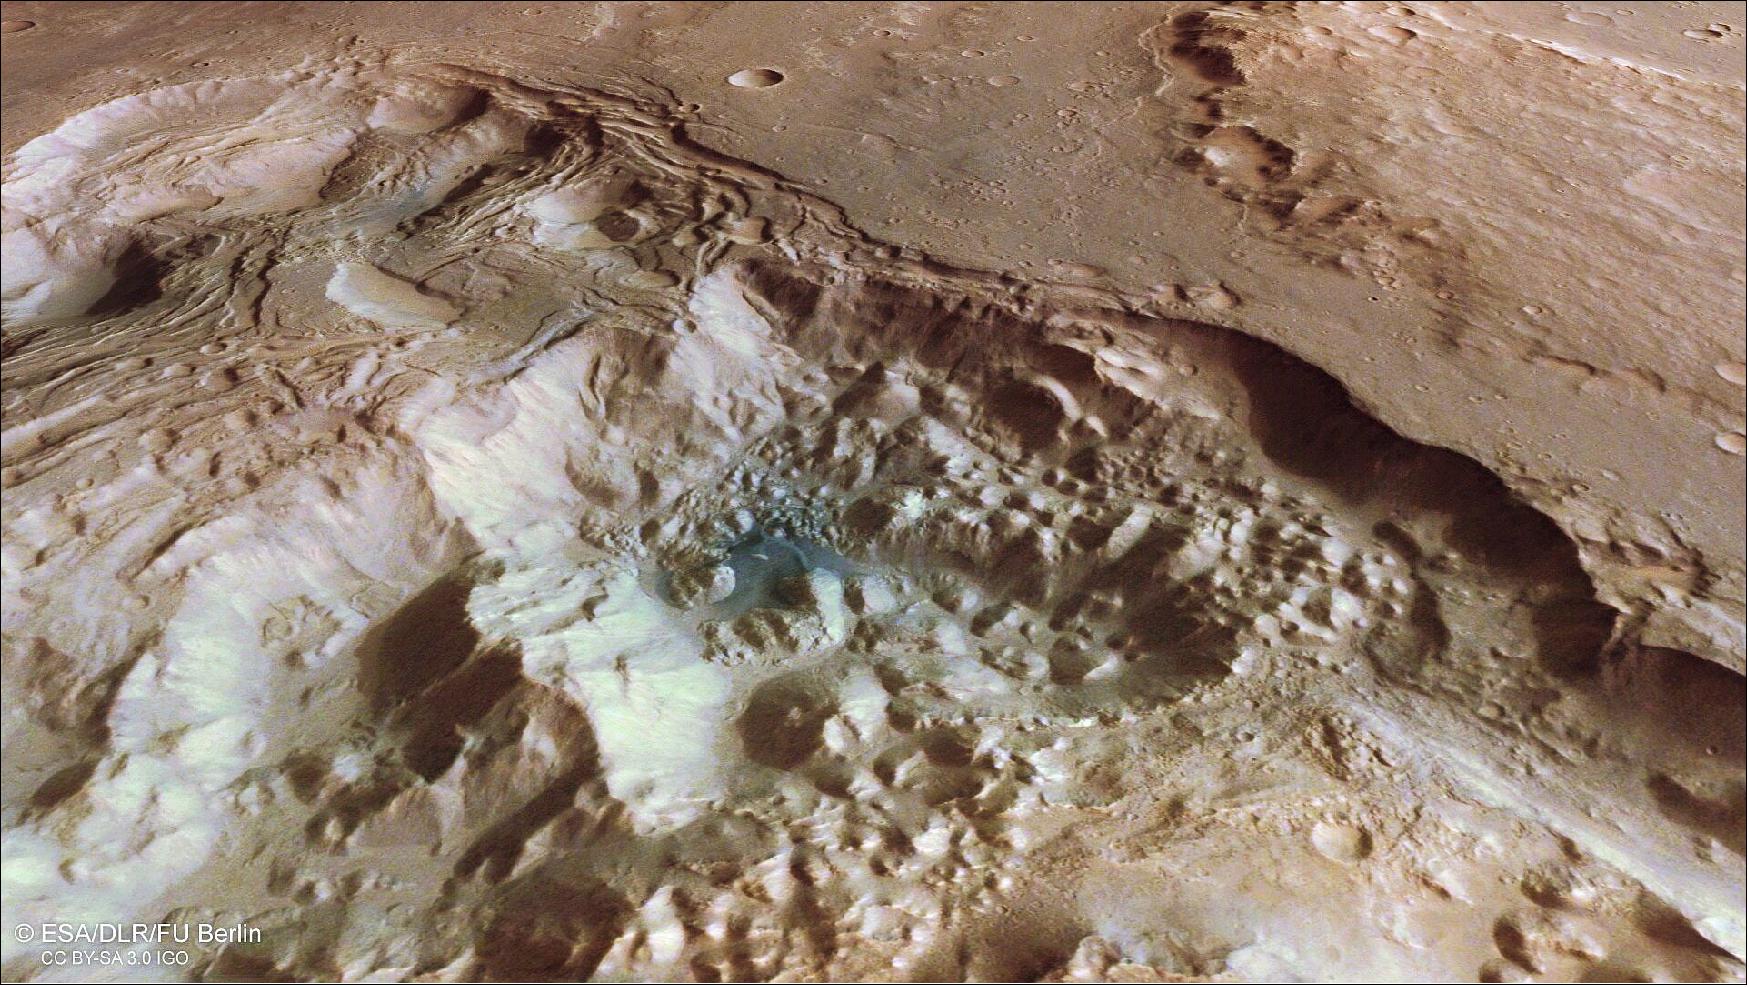 Figure 66: This image provides a perspective view of chaotic terrain in Mars’ Pyrrhae Regio. Chaotic terrain forms as a shifting subsurface layer of melting ice and sediment causes the surface above to collapse. This view comprises data gathered by ESA’s Mars Express on 3 August 2020 during orbit 20972. The ground resolution is approximately 16 m/pixel and the image is centered at about 322ºE/16ºS. This view was created using data from the nadir and color channels of the High Resolution Stereo Camera (HRSC). The nadir channel is aligned perpendicular to the surface of Mars, as if looking straight down at the surface. HRSC stereo imaging was then used to derive the digital elevation model (DTM) upon which this oblique view is based (image credit: ESA/DLR/FU Berlin, CC BY-SA 3.0 IGO)